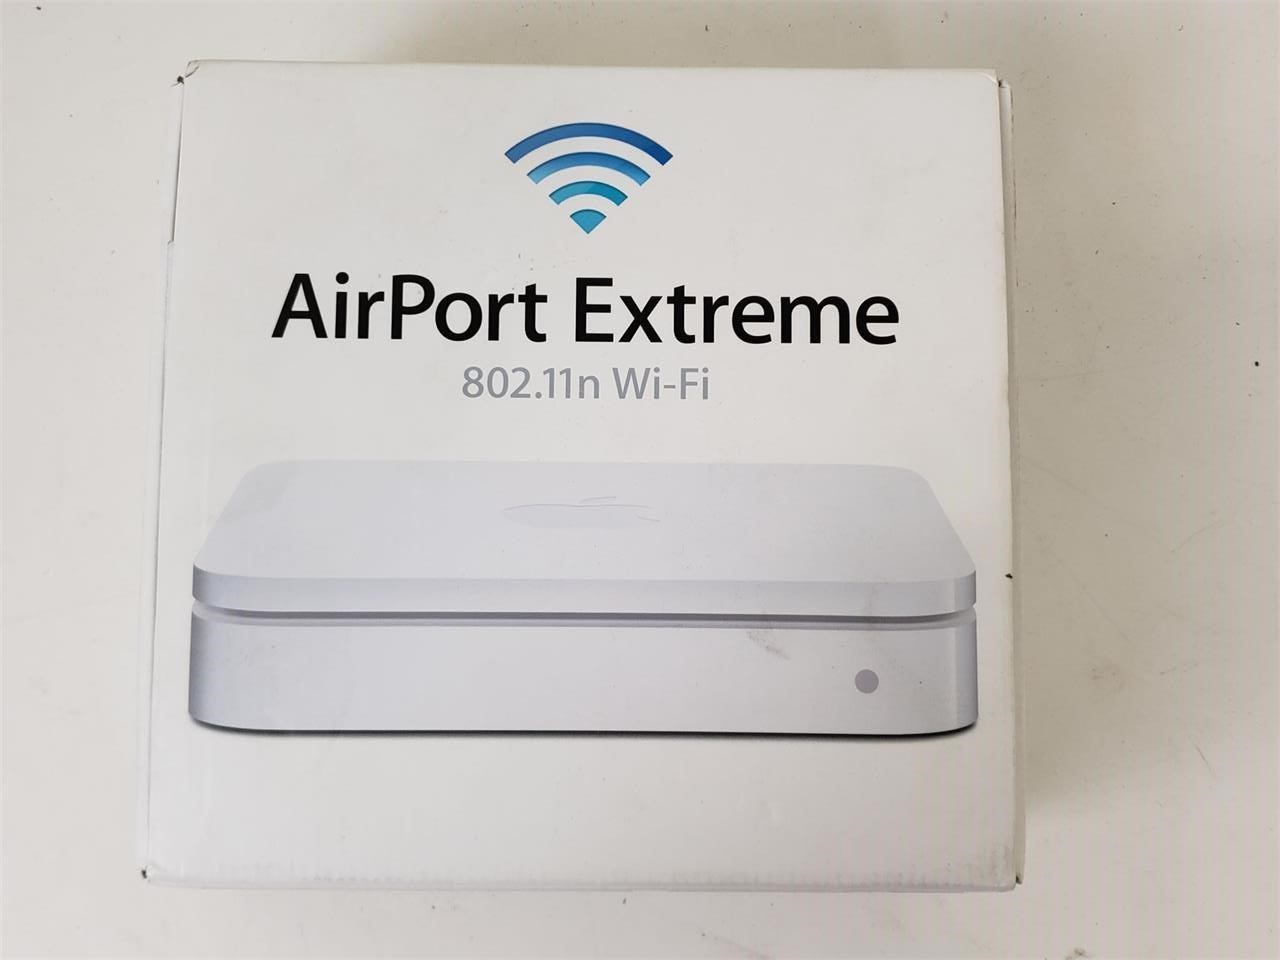 AirPort Extreme 802.11n Wi-Fi